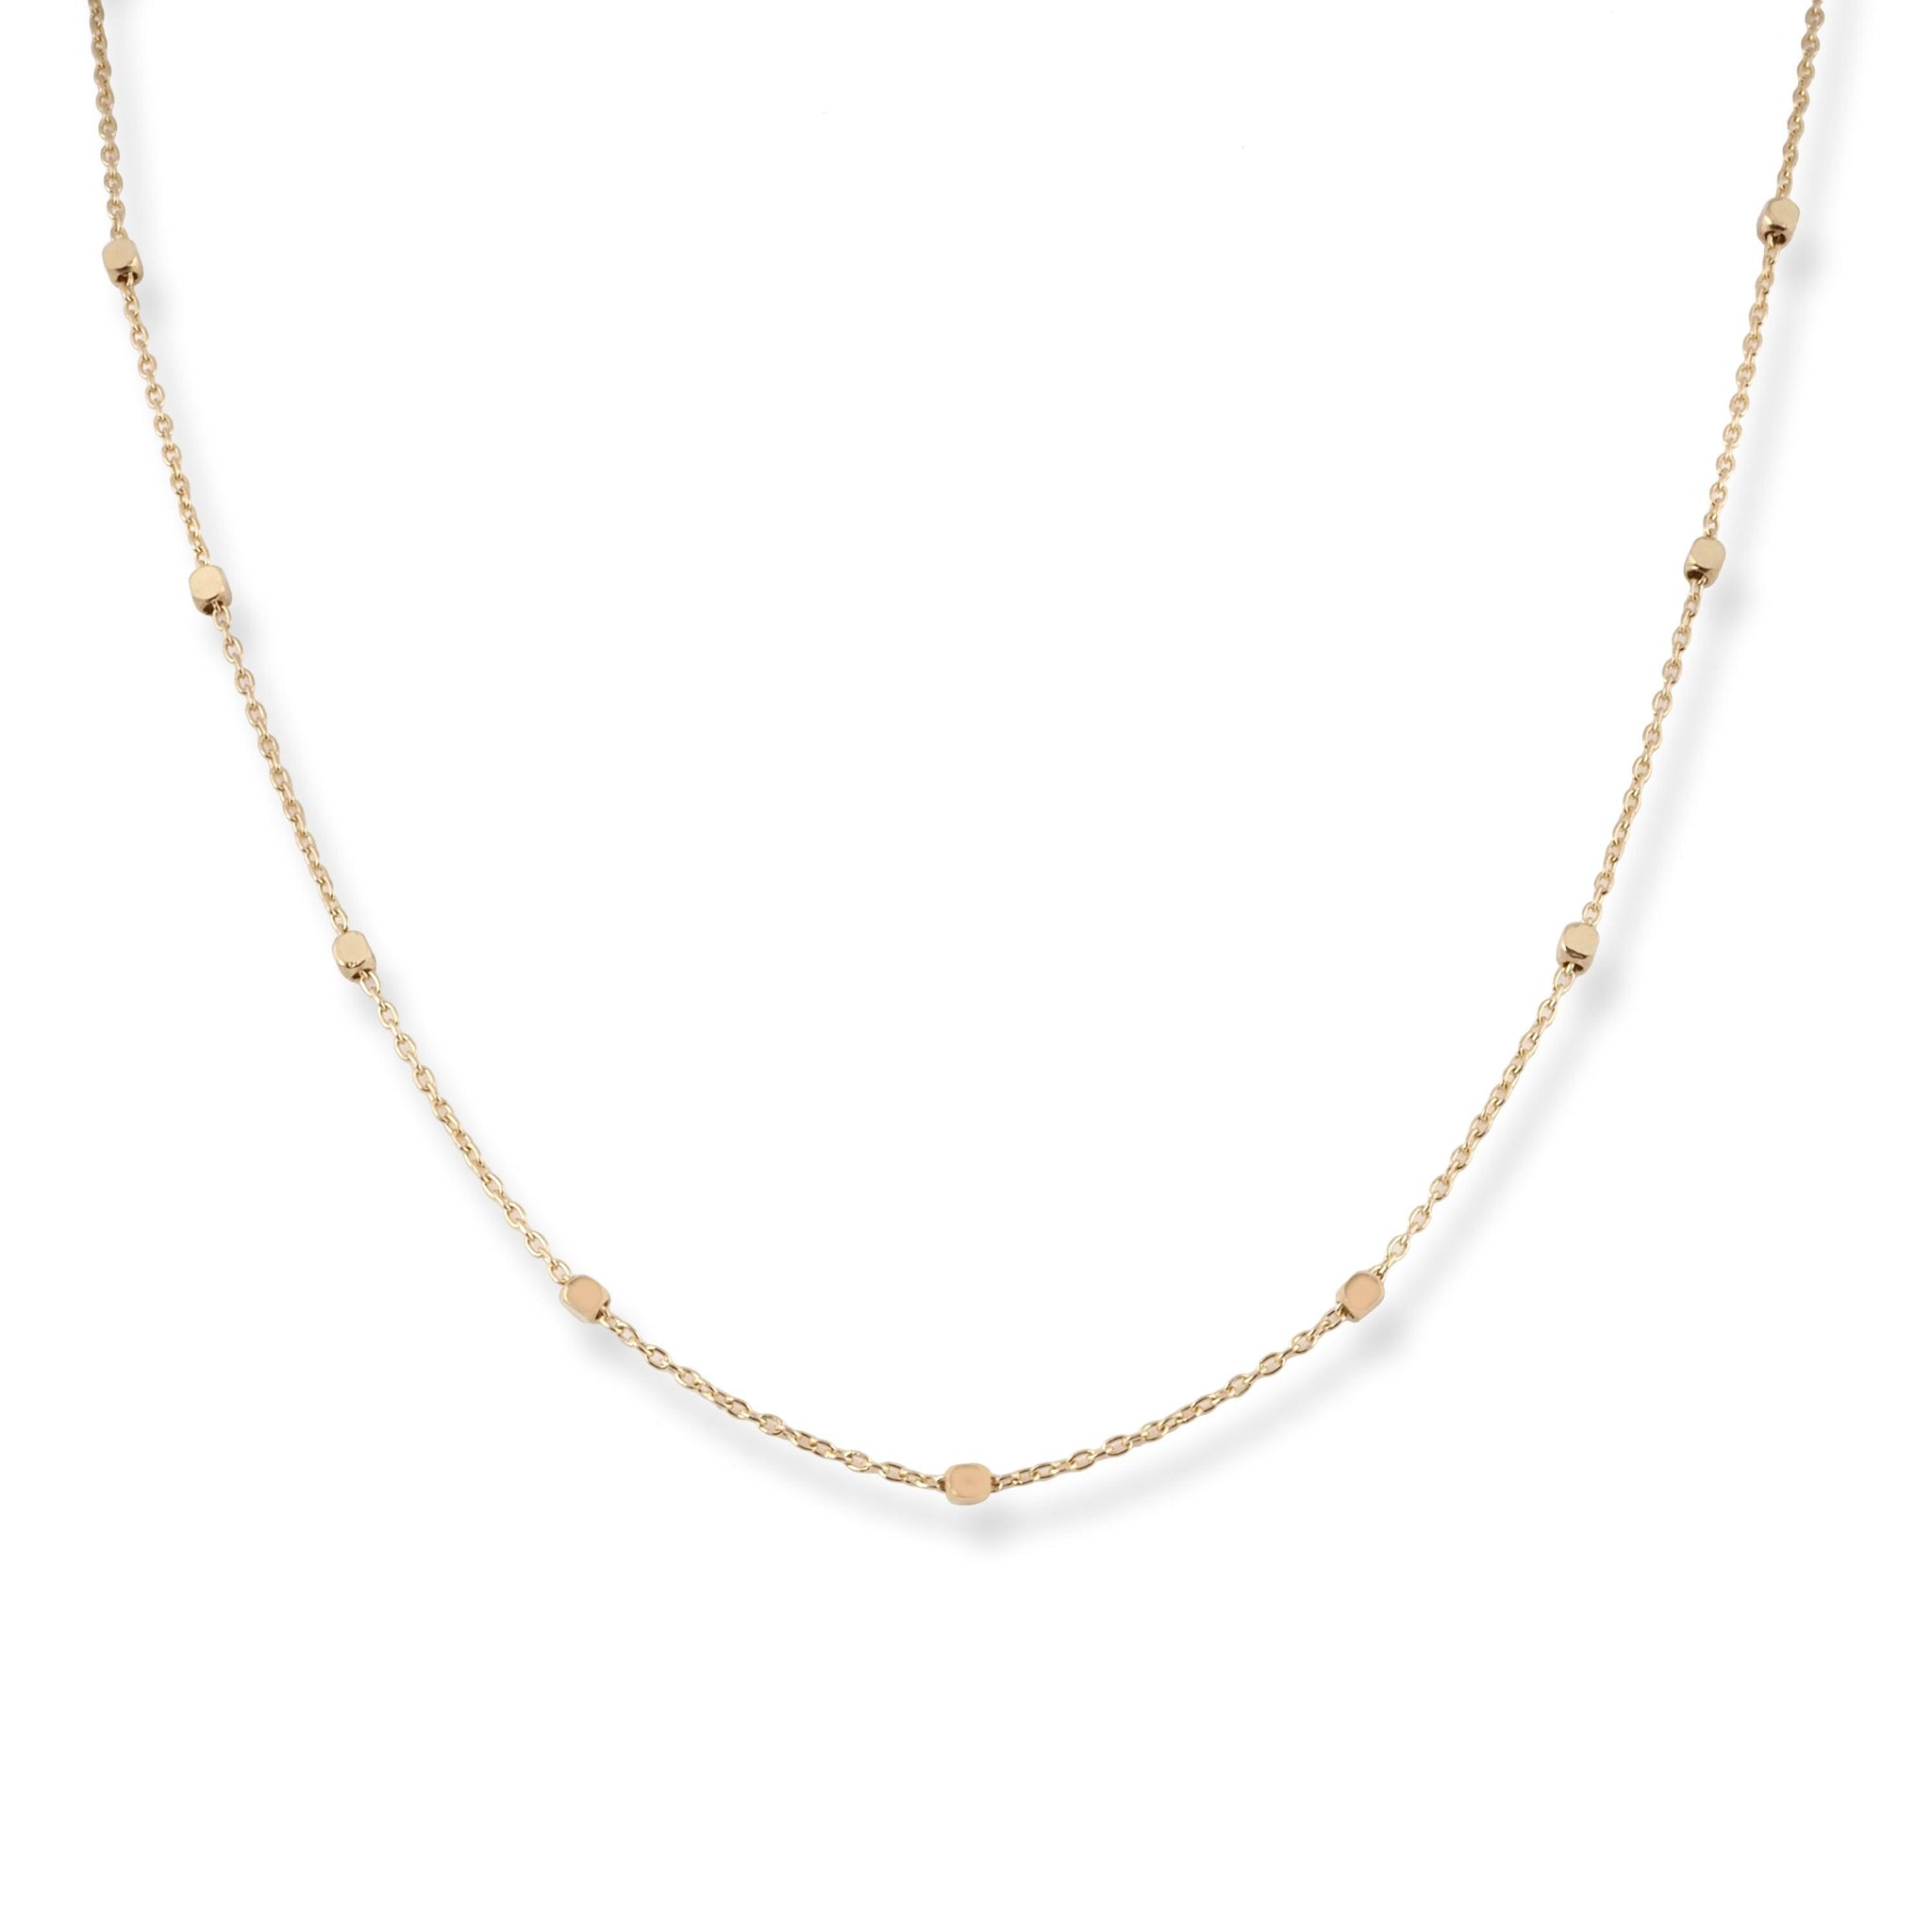 18ct Yellow Gold Necklace with Plain Beads & Lobster Clasp N-7943